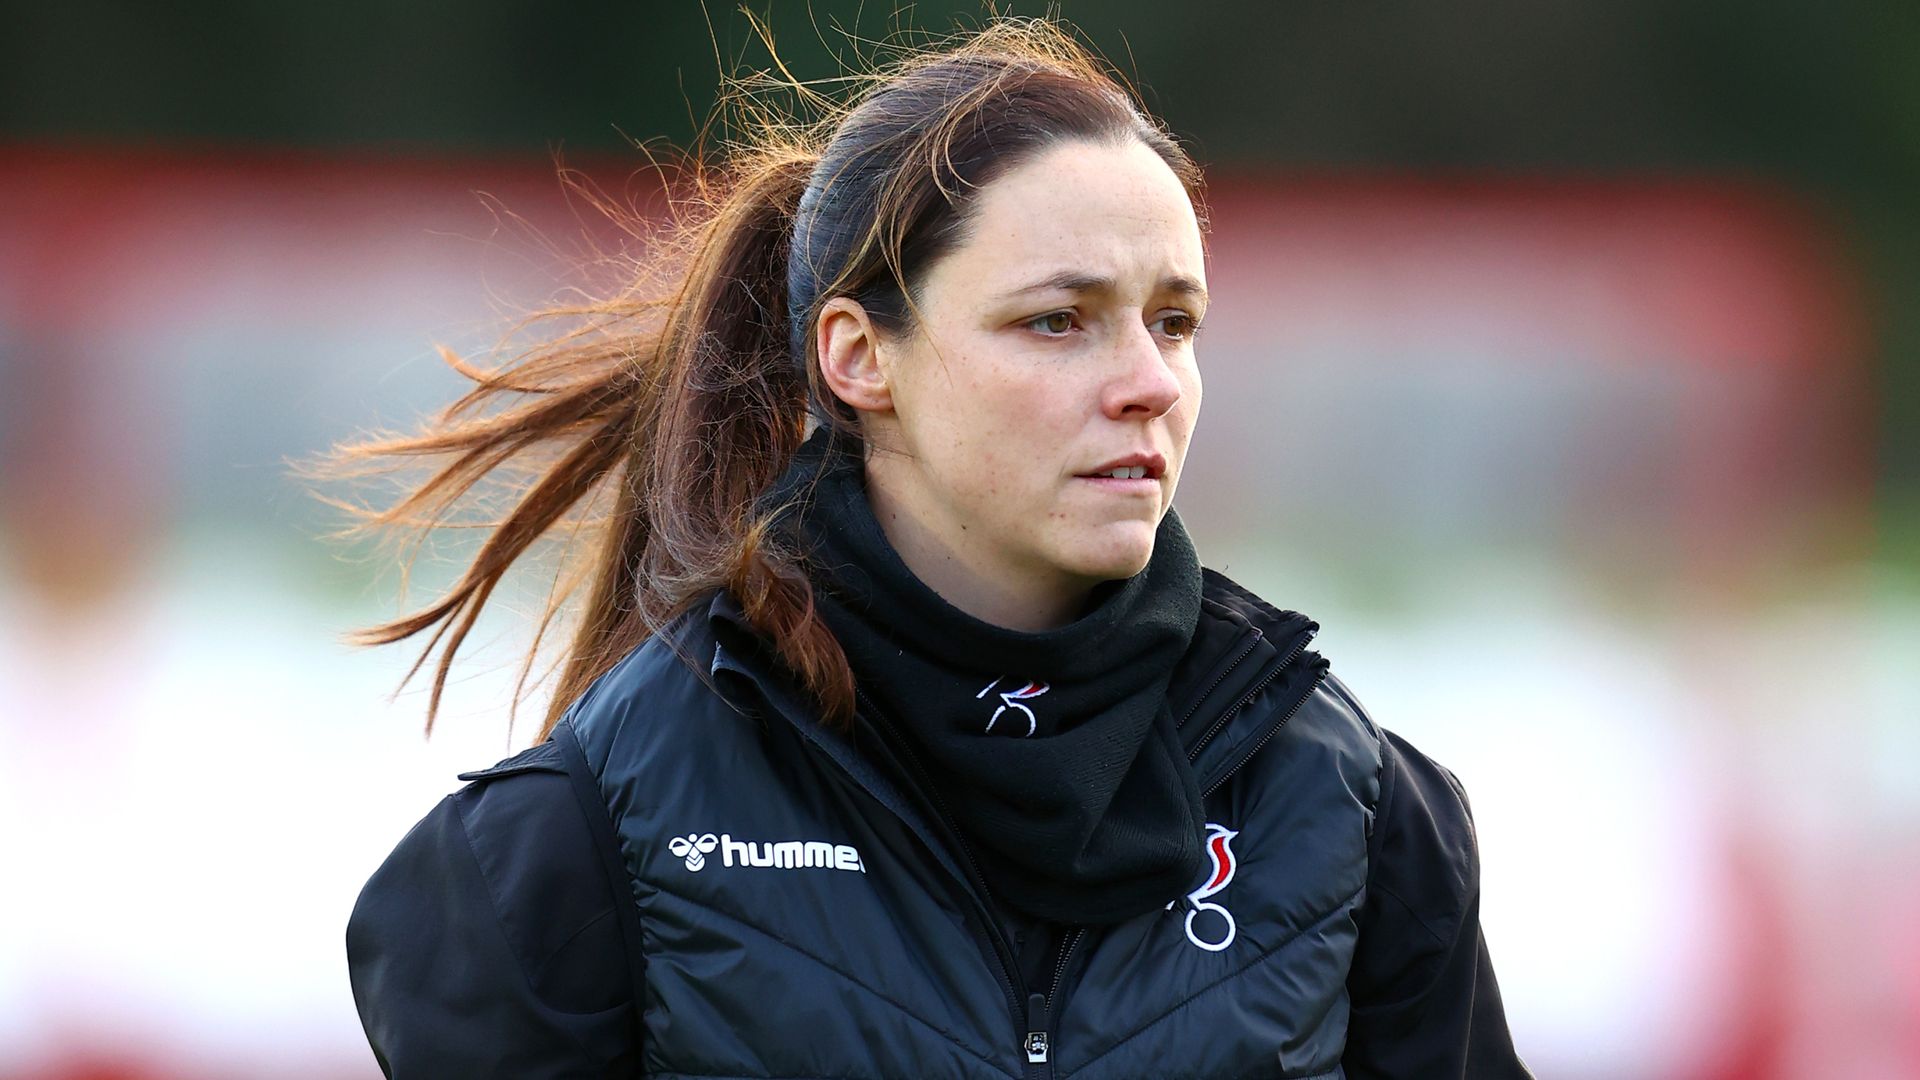 Bristol City Women boss Smith told to stay 'in the kitchen'